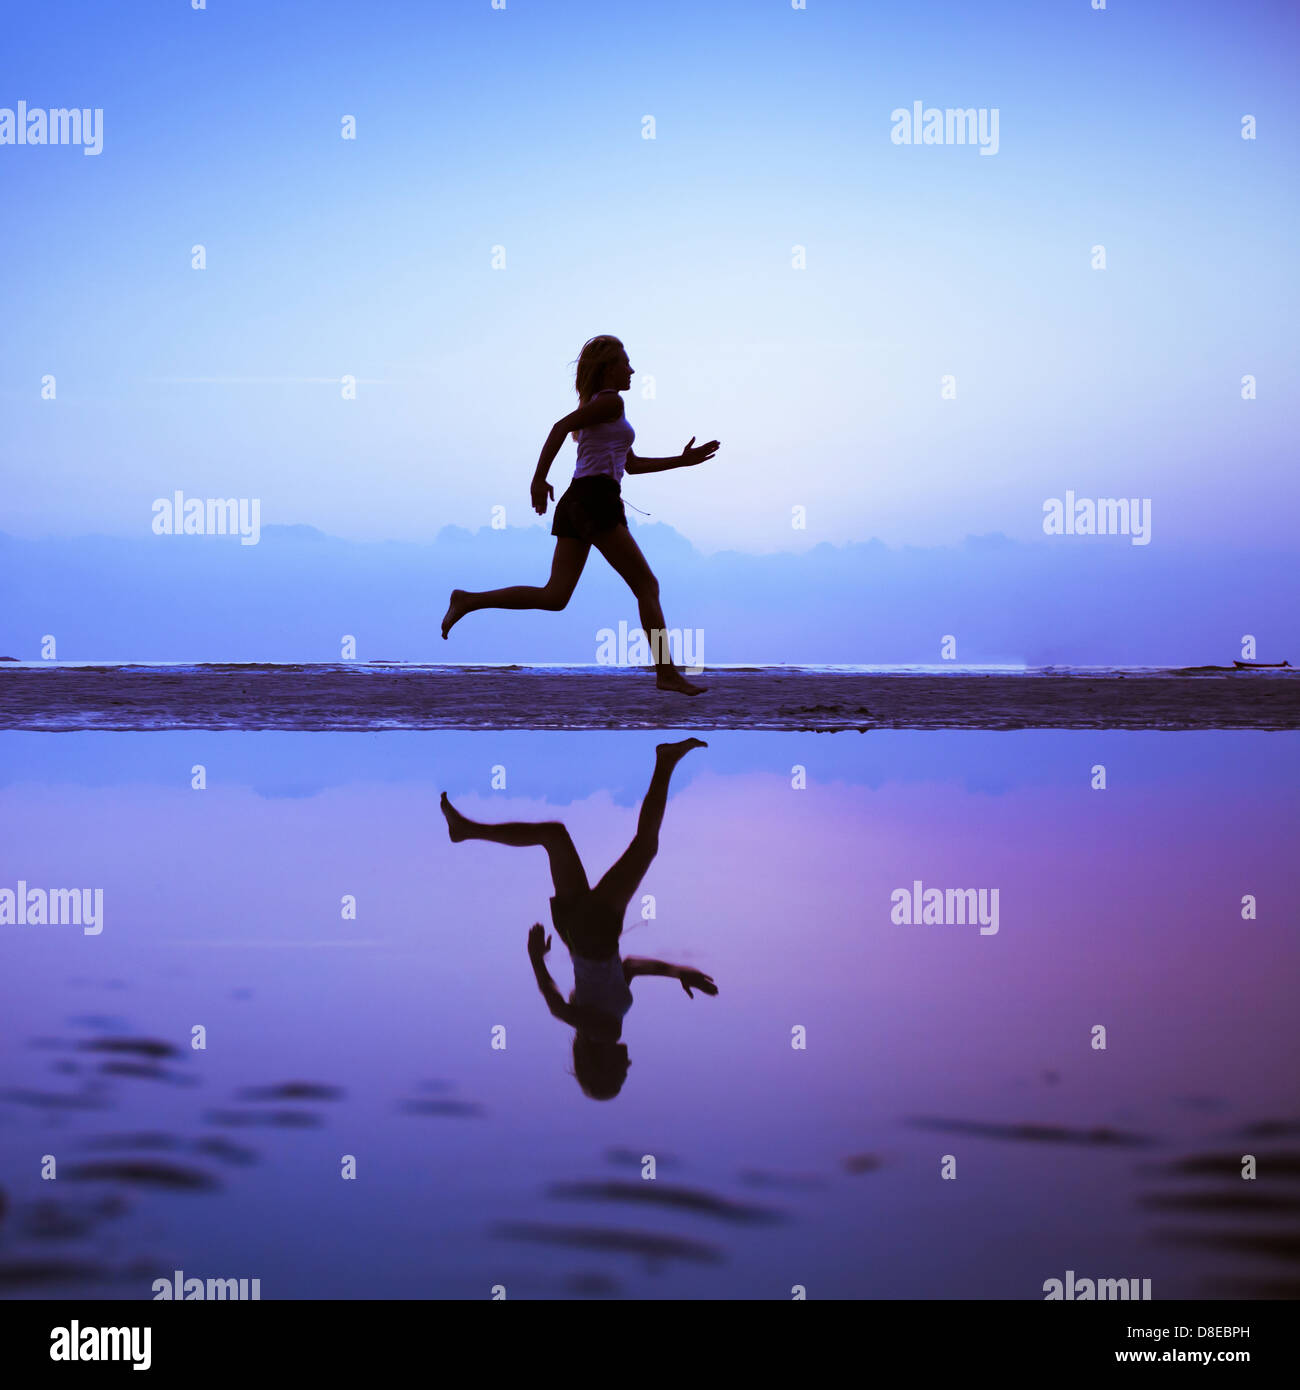 Female runner silhouette is mirrored below with a blue sunset sky as background Stock Photo